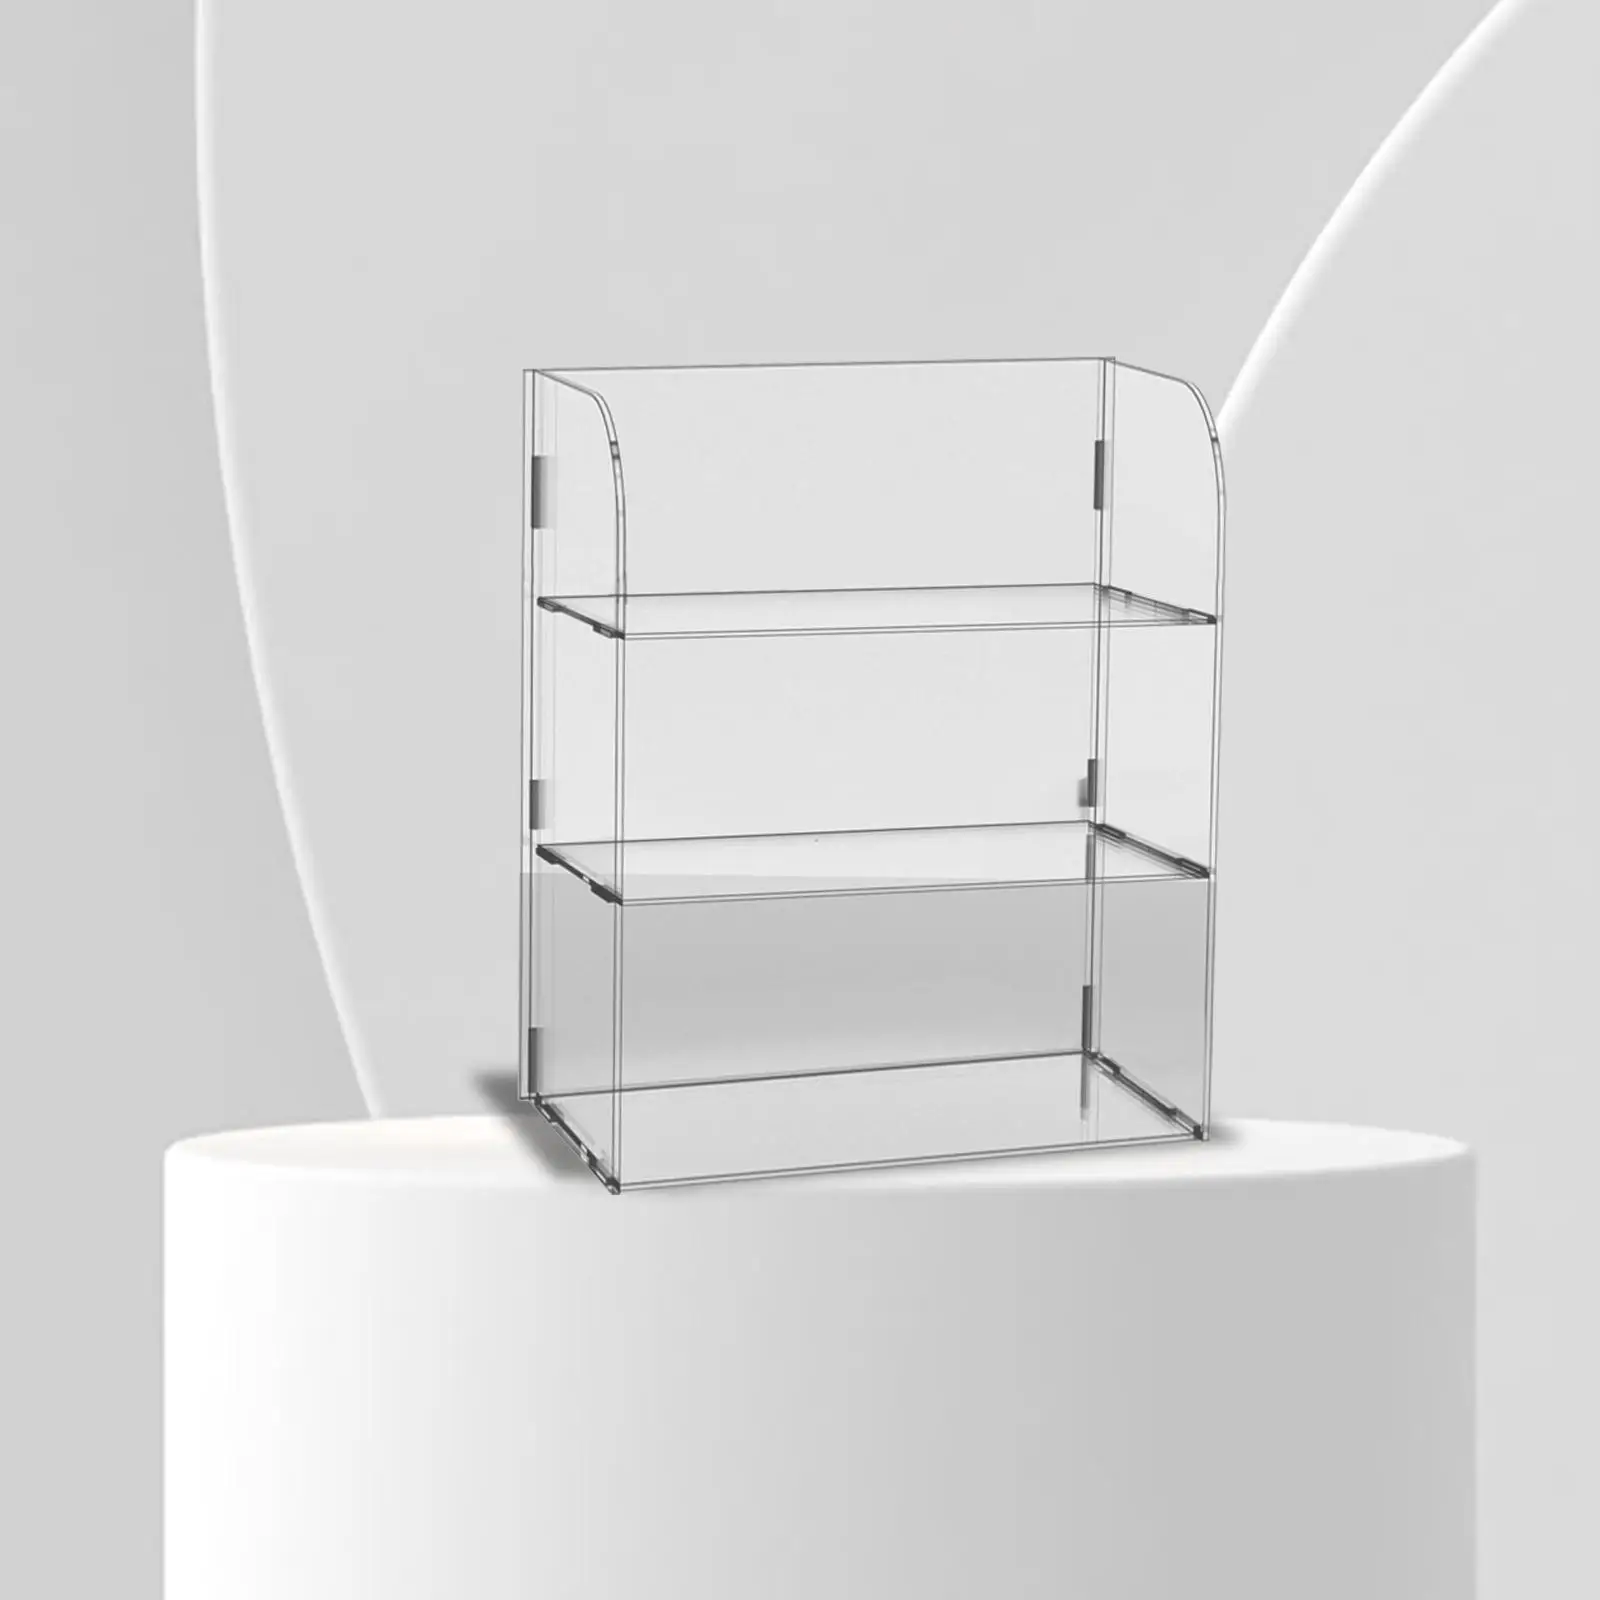 Multi Purpose Acrylic Display Rack Risers Showcase Stand Shelves Transparent Countertop Toy Dolls Figure for Jewelry Cosmetics